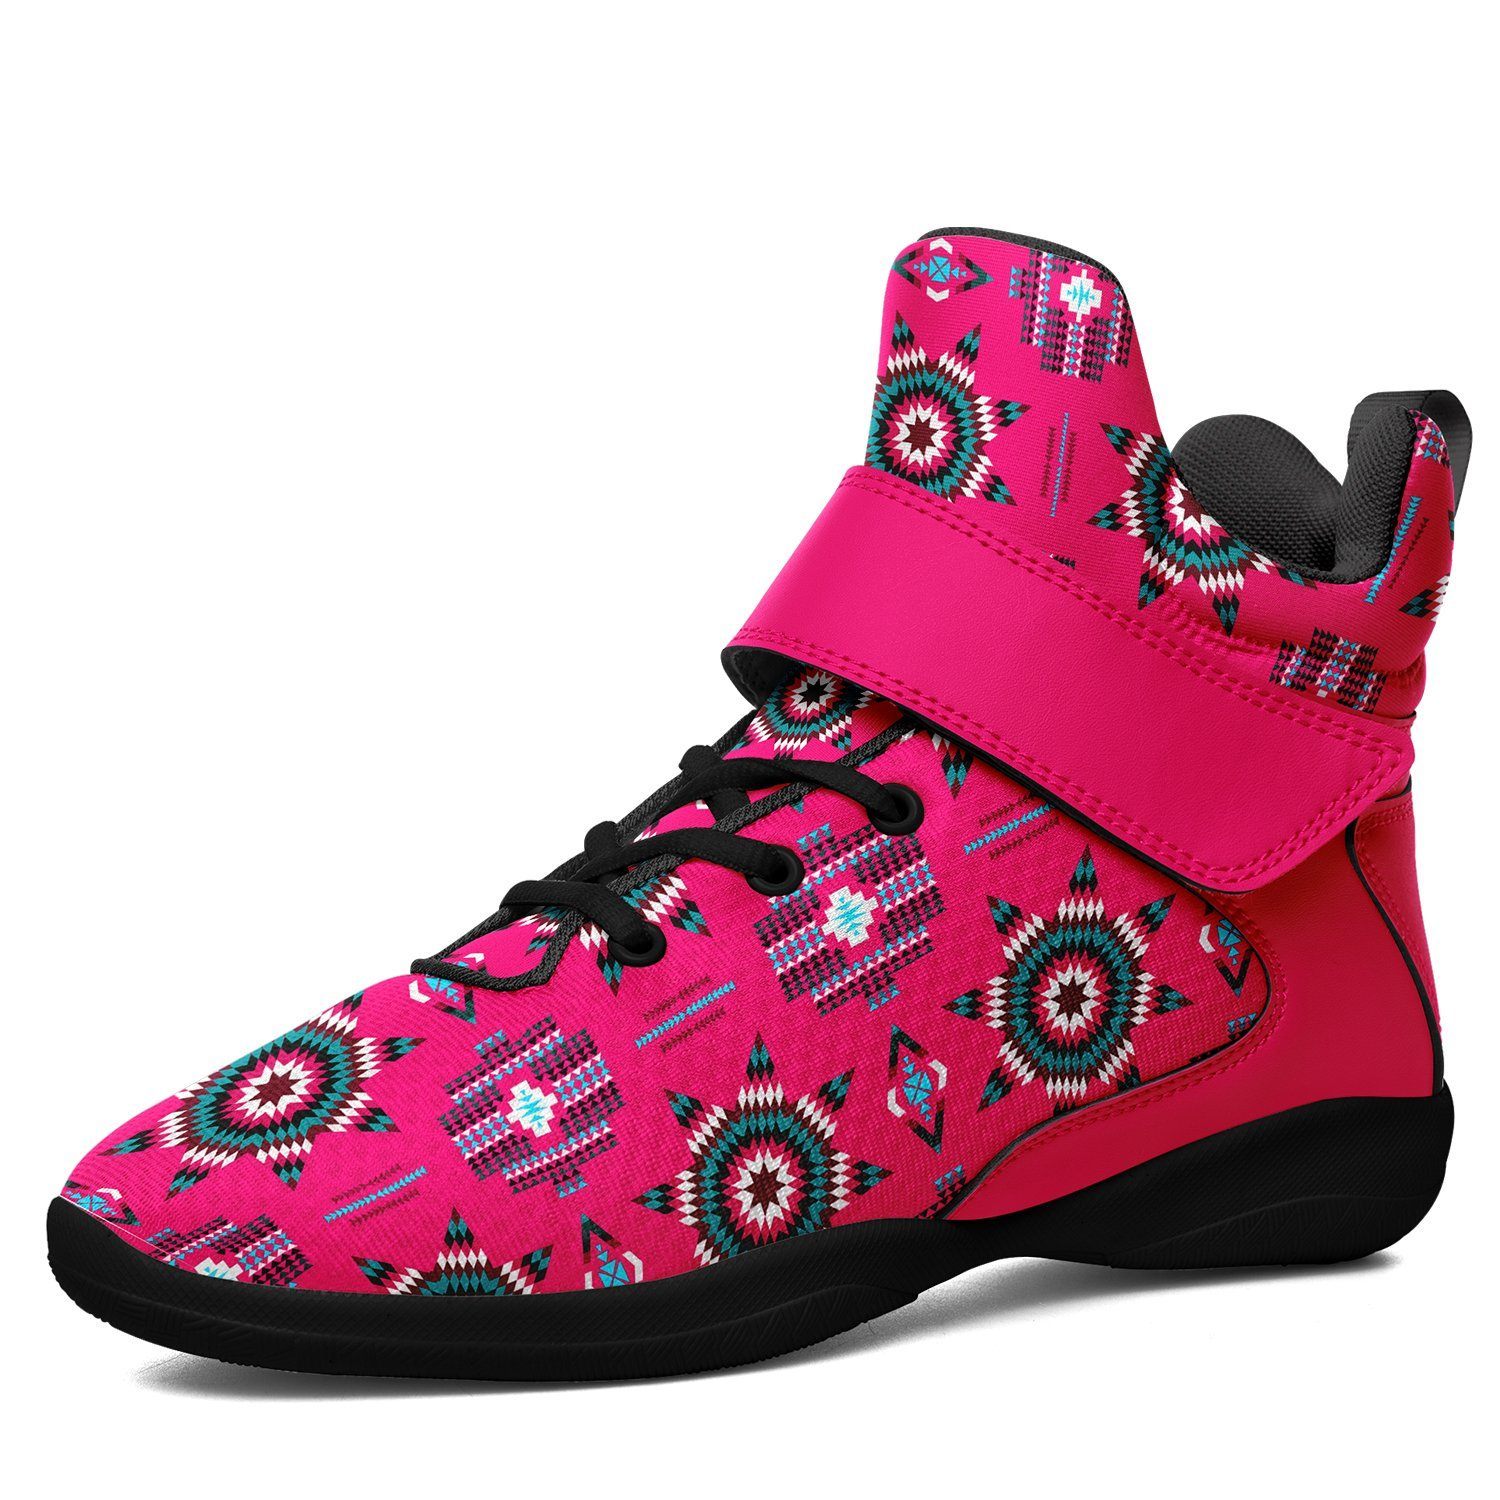 Rising Star Strawberry Moon Kid's Ipottaa Basketball / Sport High Top Shoes 49 Dzine US Child 12.5 / EUR 30 Black Sole with Pink Strap 